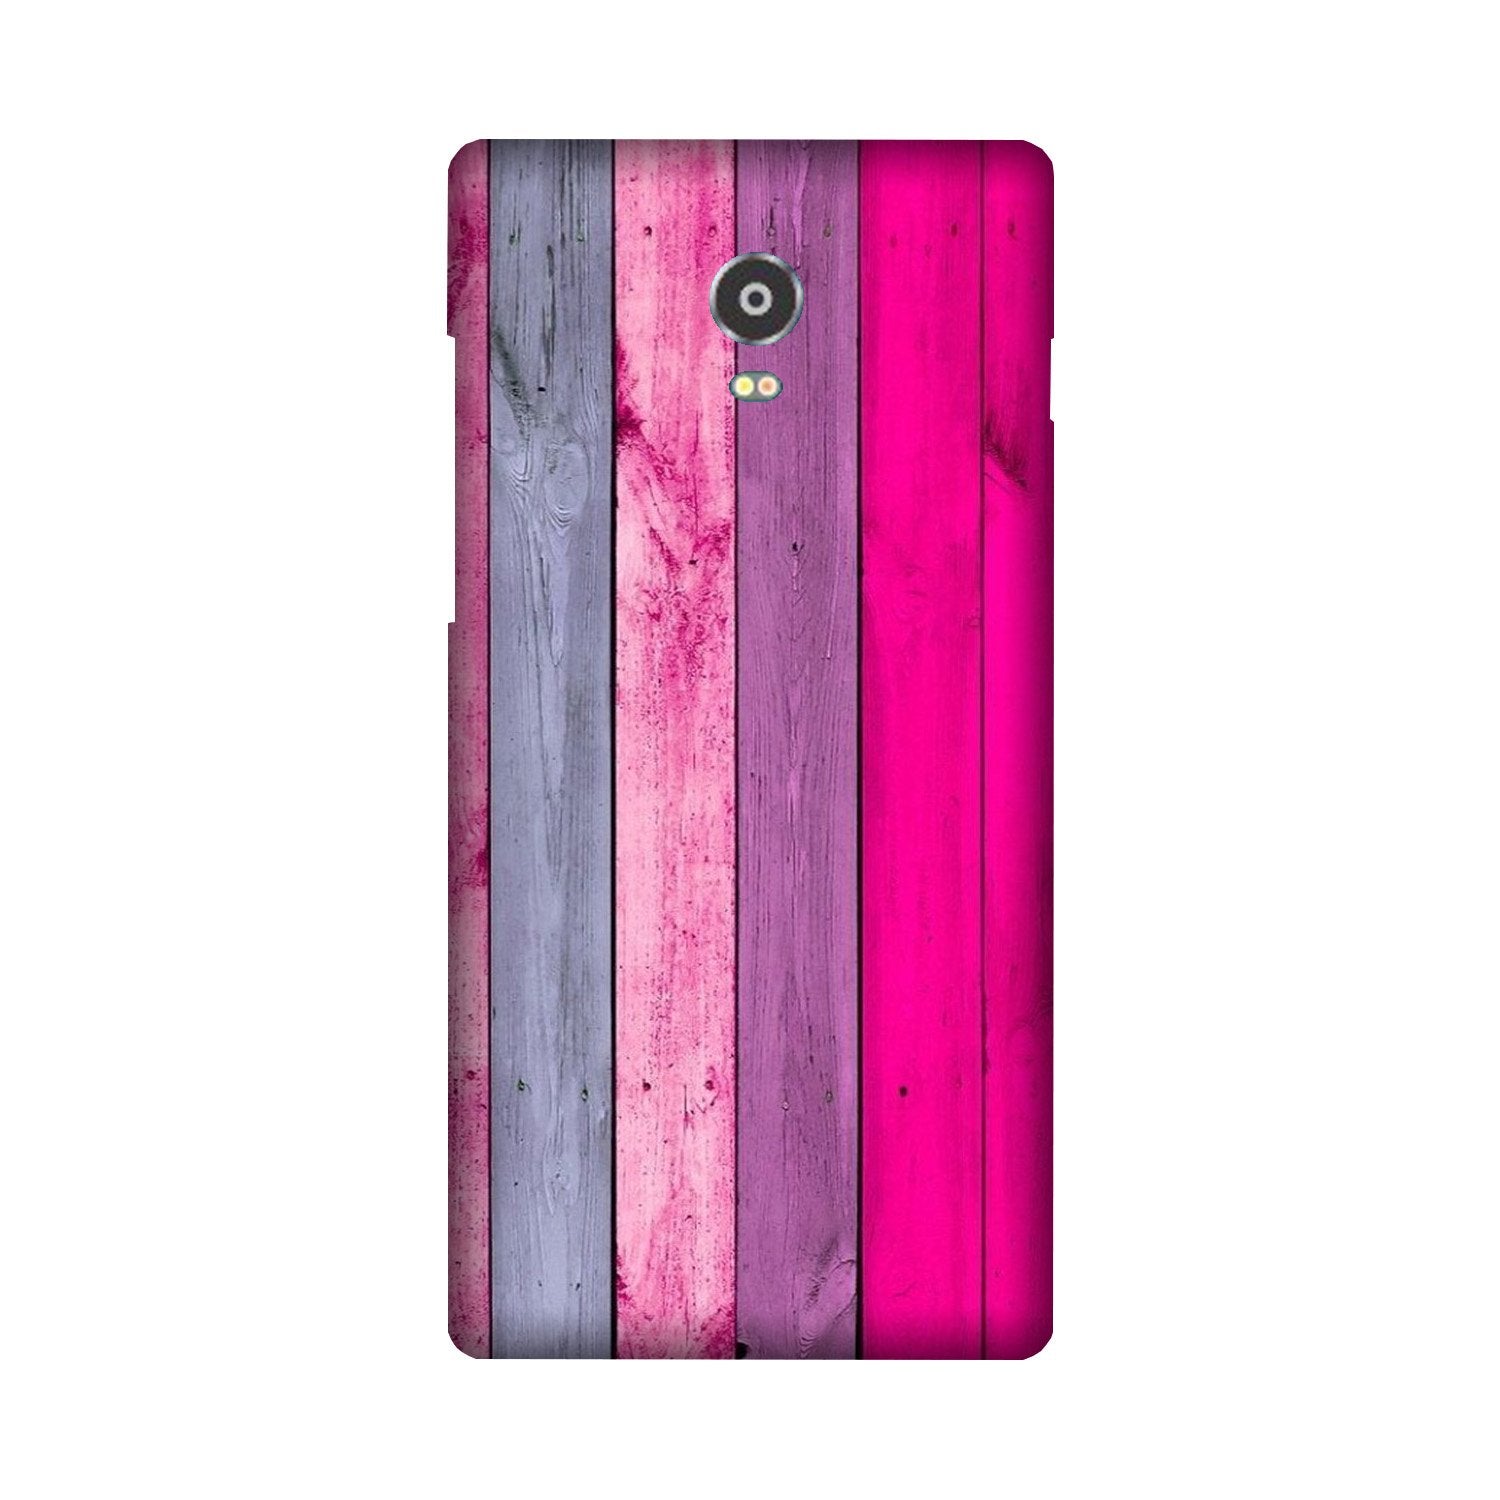 Wooden look Case for Lenovo Vibe P1